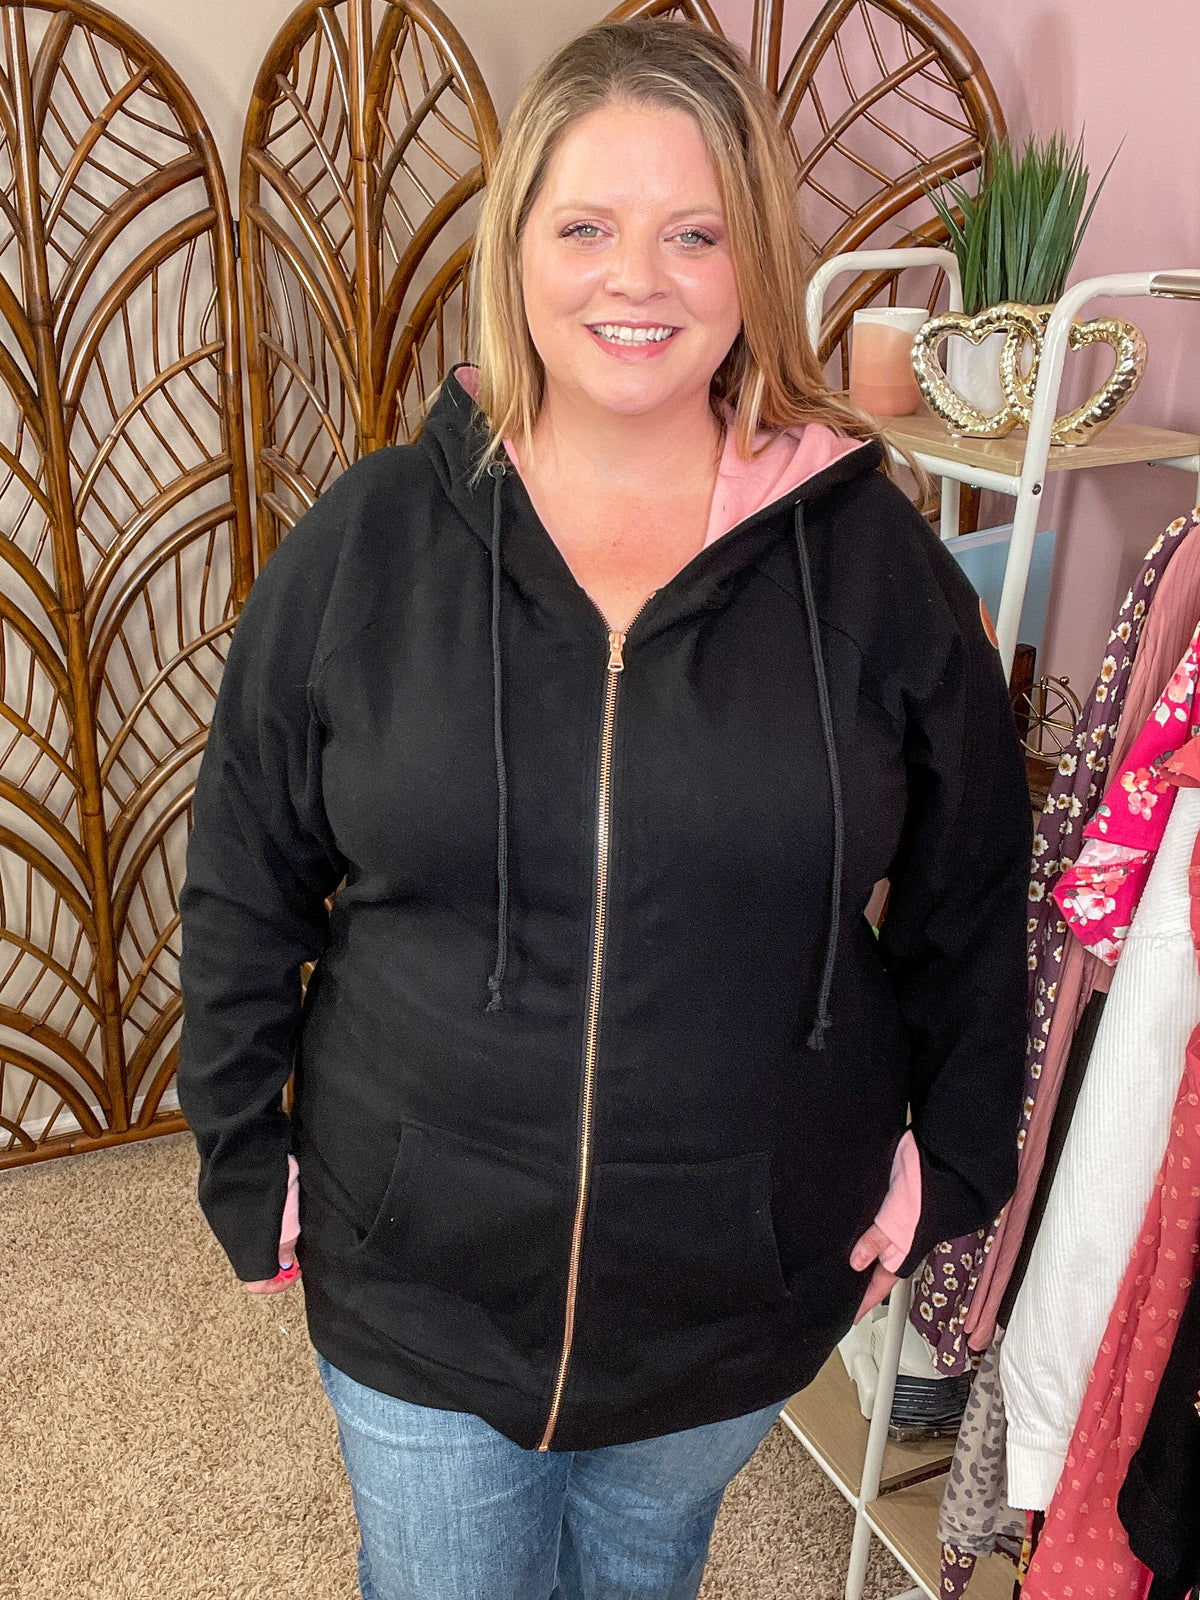 She is Extra Fullzip Hoodie - Rose Gold Accents